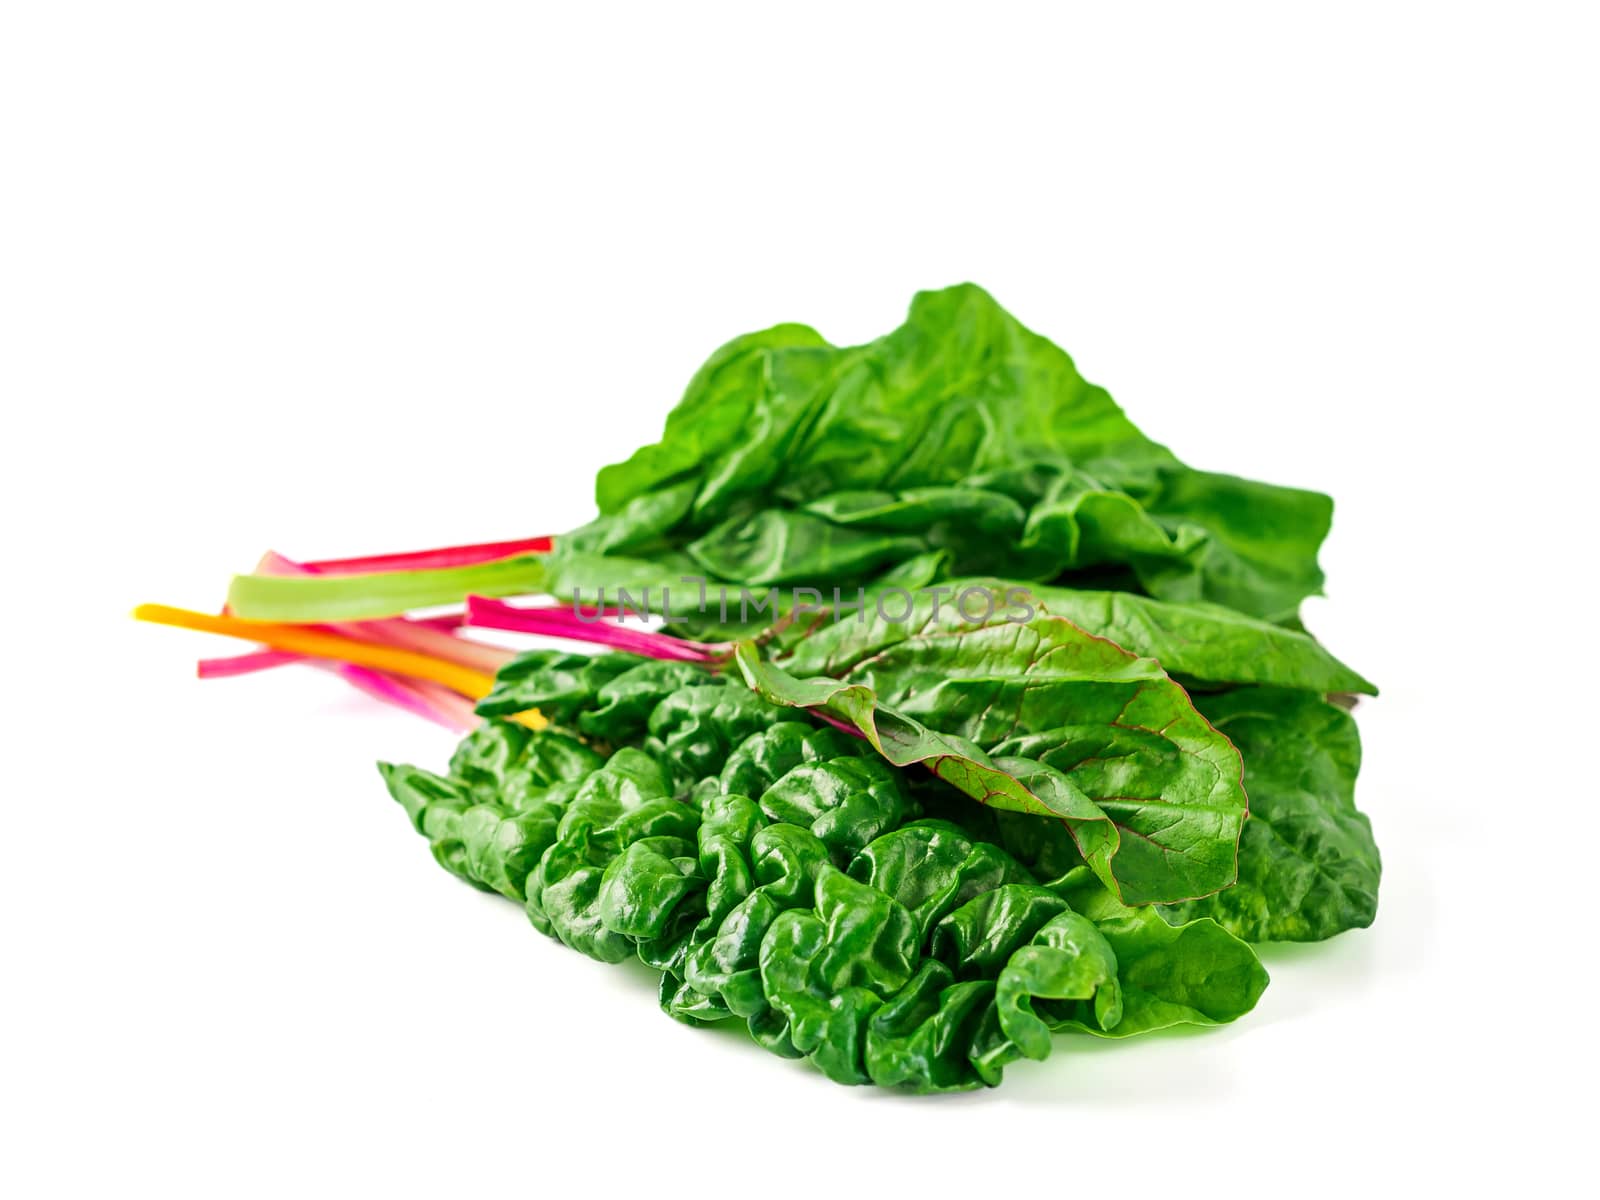 Bunch of swiss chard leafves isolated on white background. Fresh swiss rainbow chard with yellow, red and green colors, side view